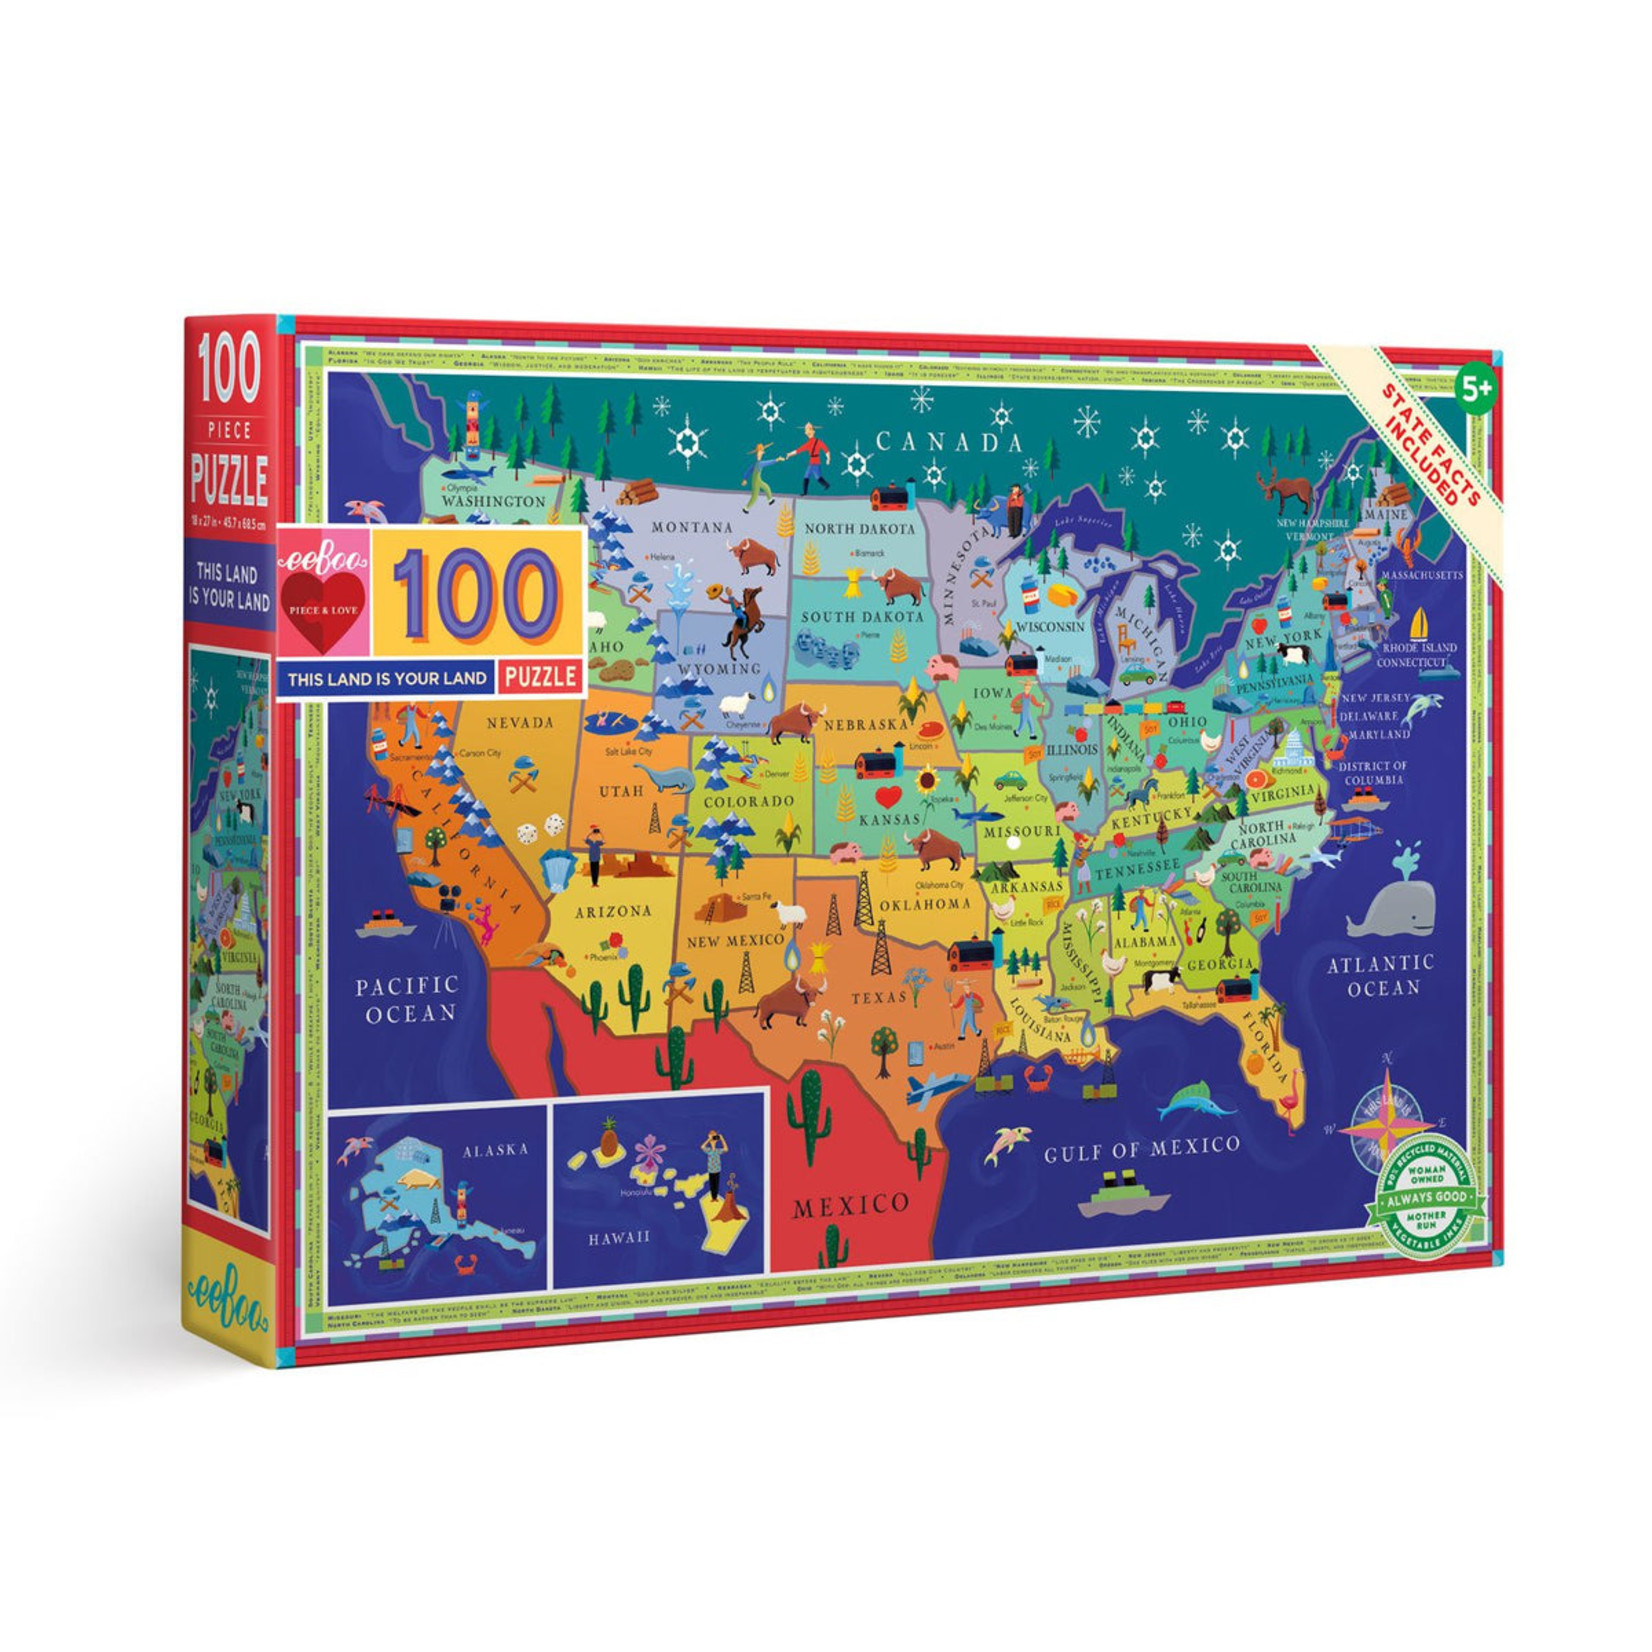 Eeboo Eeboo - This Land is Your Land 100pc Puzzle